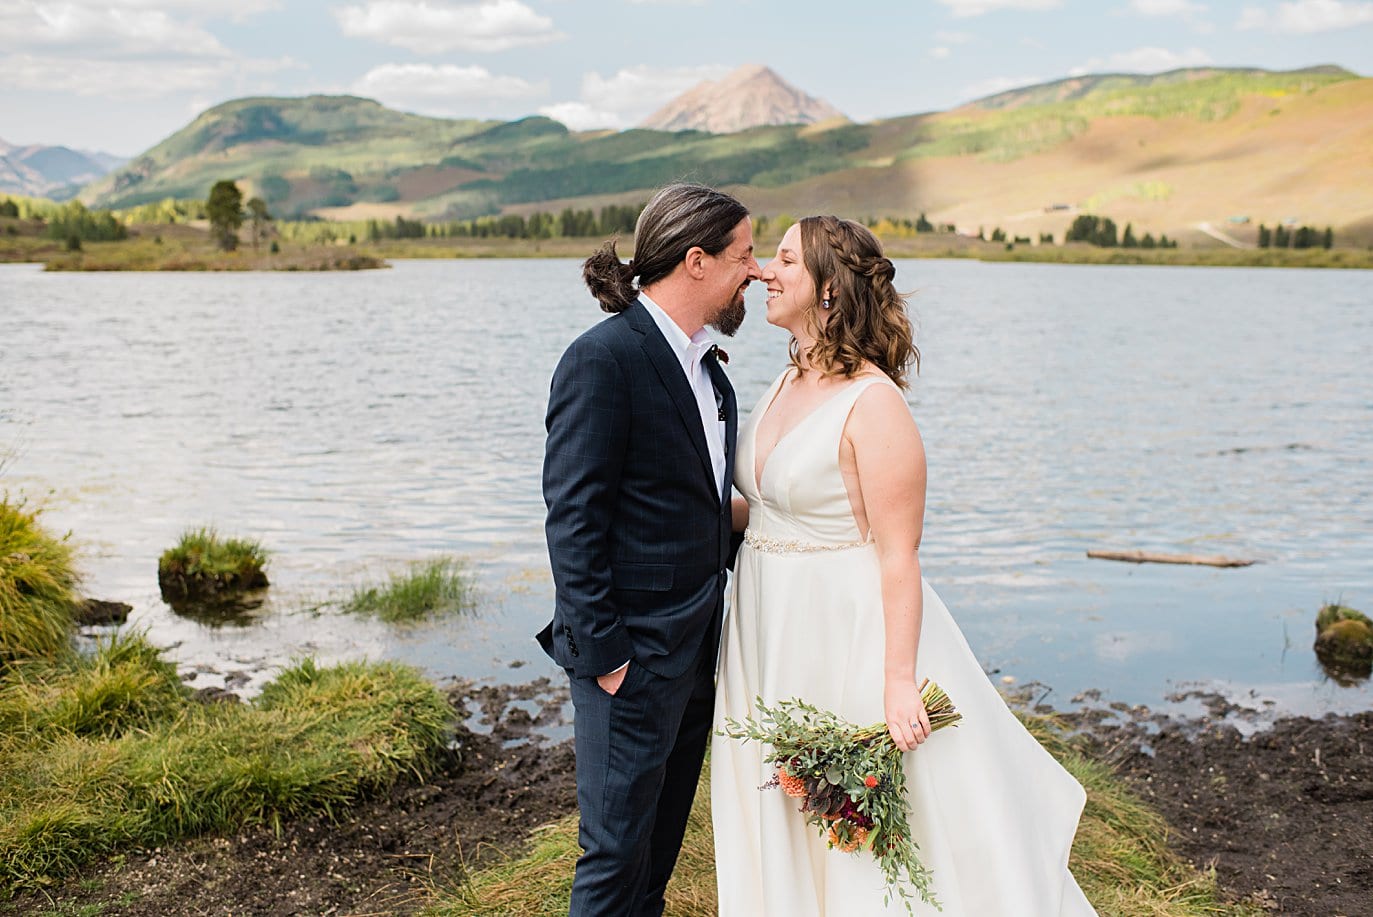 bride and groom cuddle after first look at Crested Butte Elopement by Crested Butte elopement photographer Jennie Crate